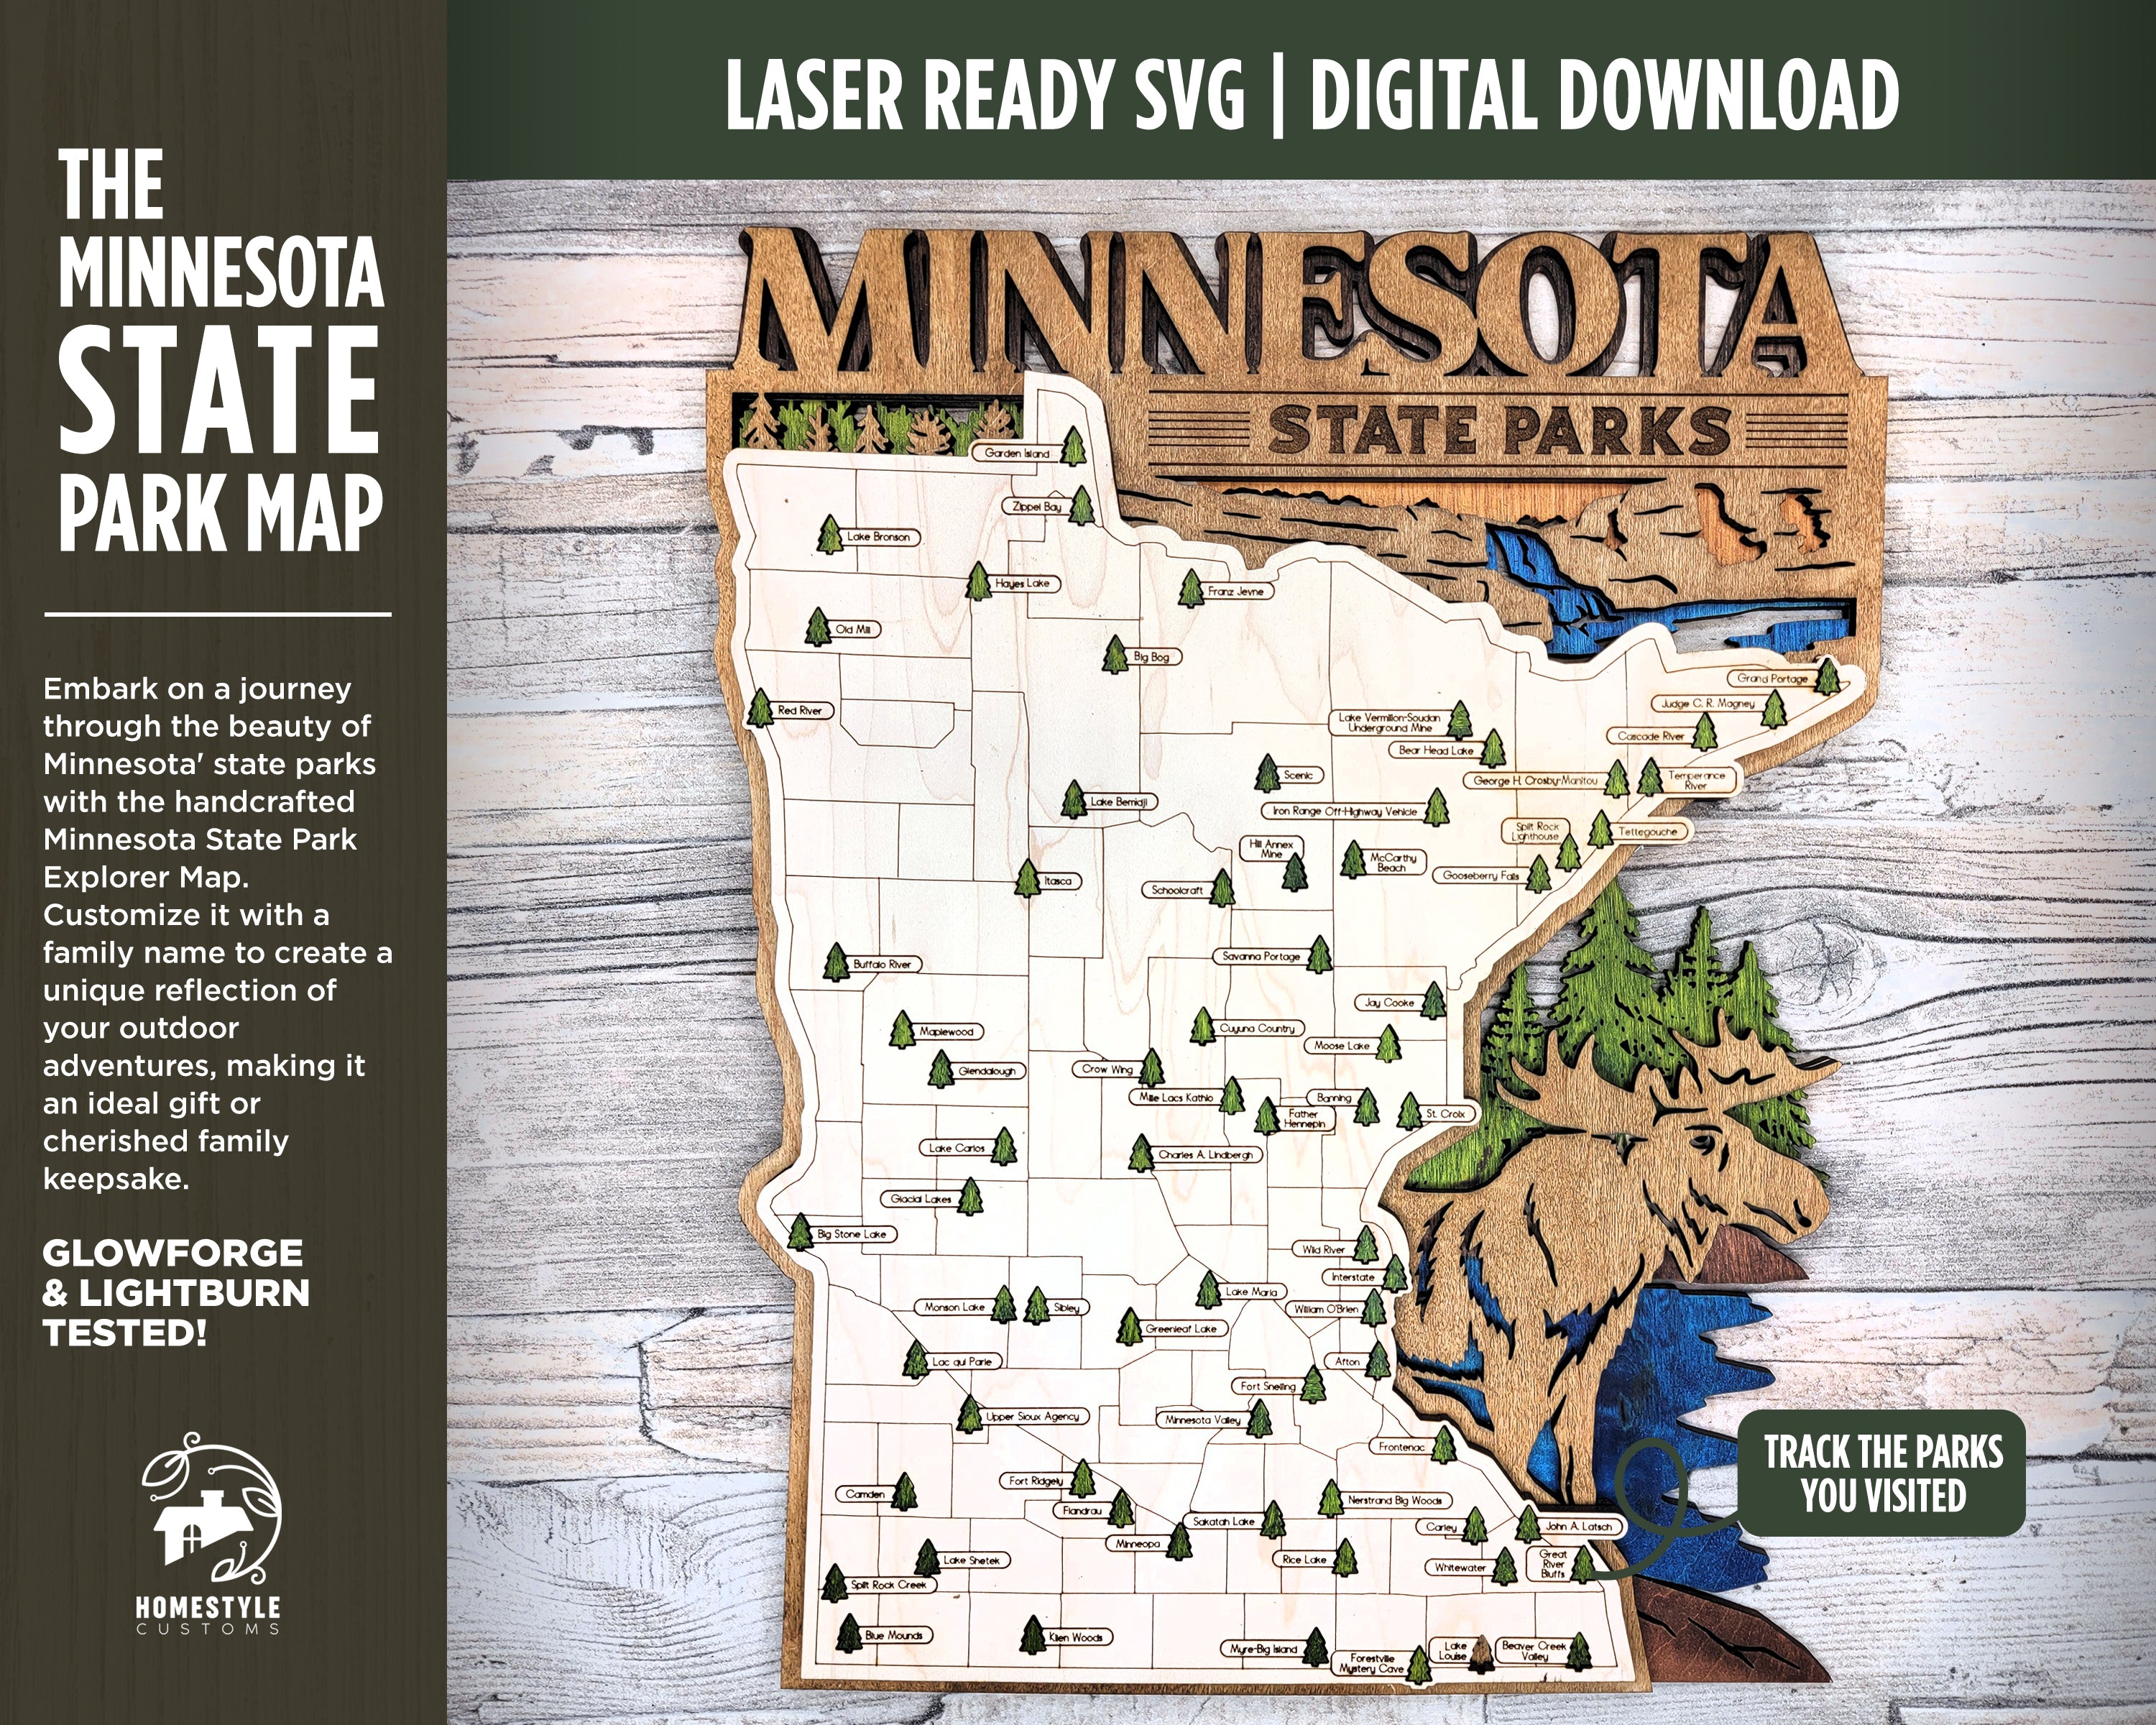 The Minnesota State Park Map Custom And Non Customizable Options S Homestyle Customs 9236